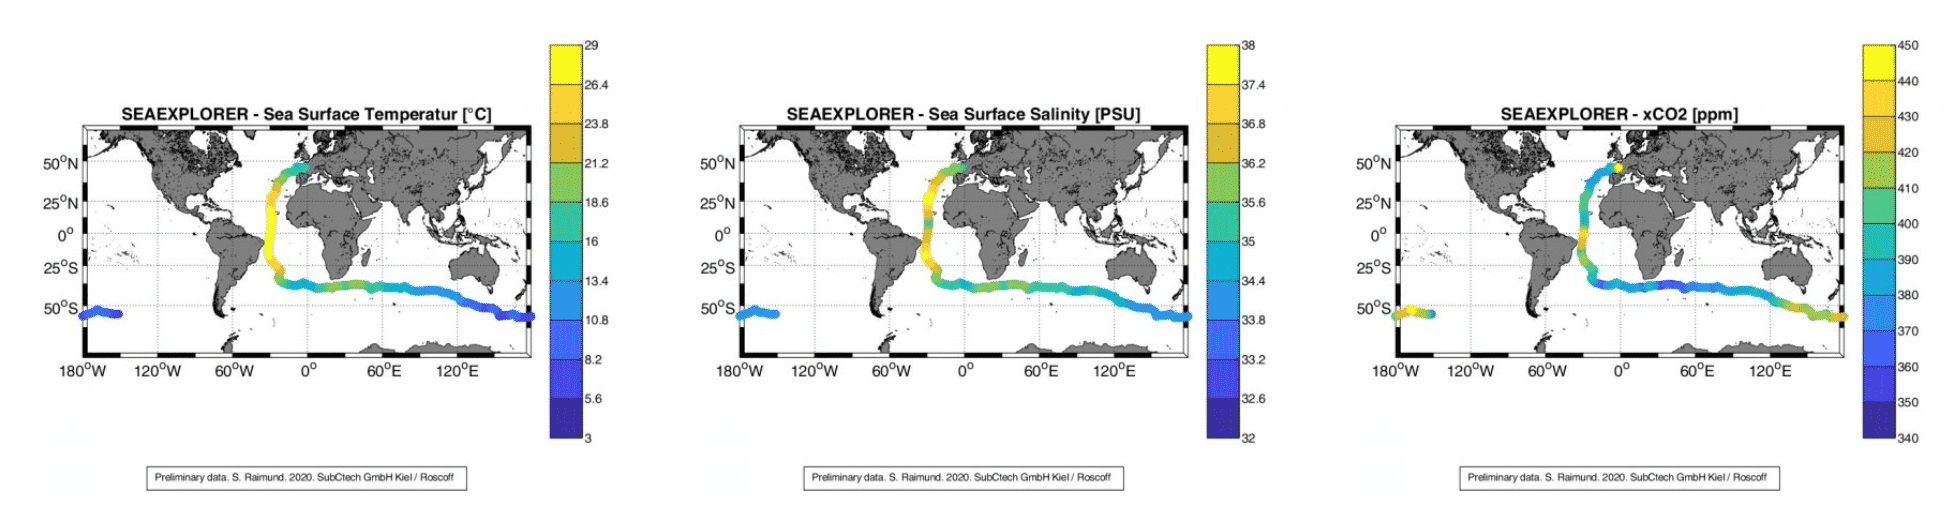 data collected by Seaexplorer is already being used in the Global Carbon Budget 2020